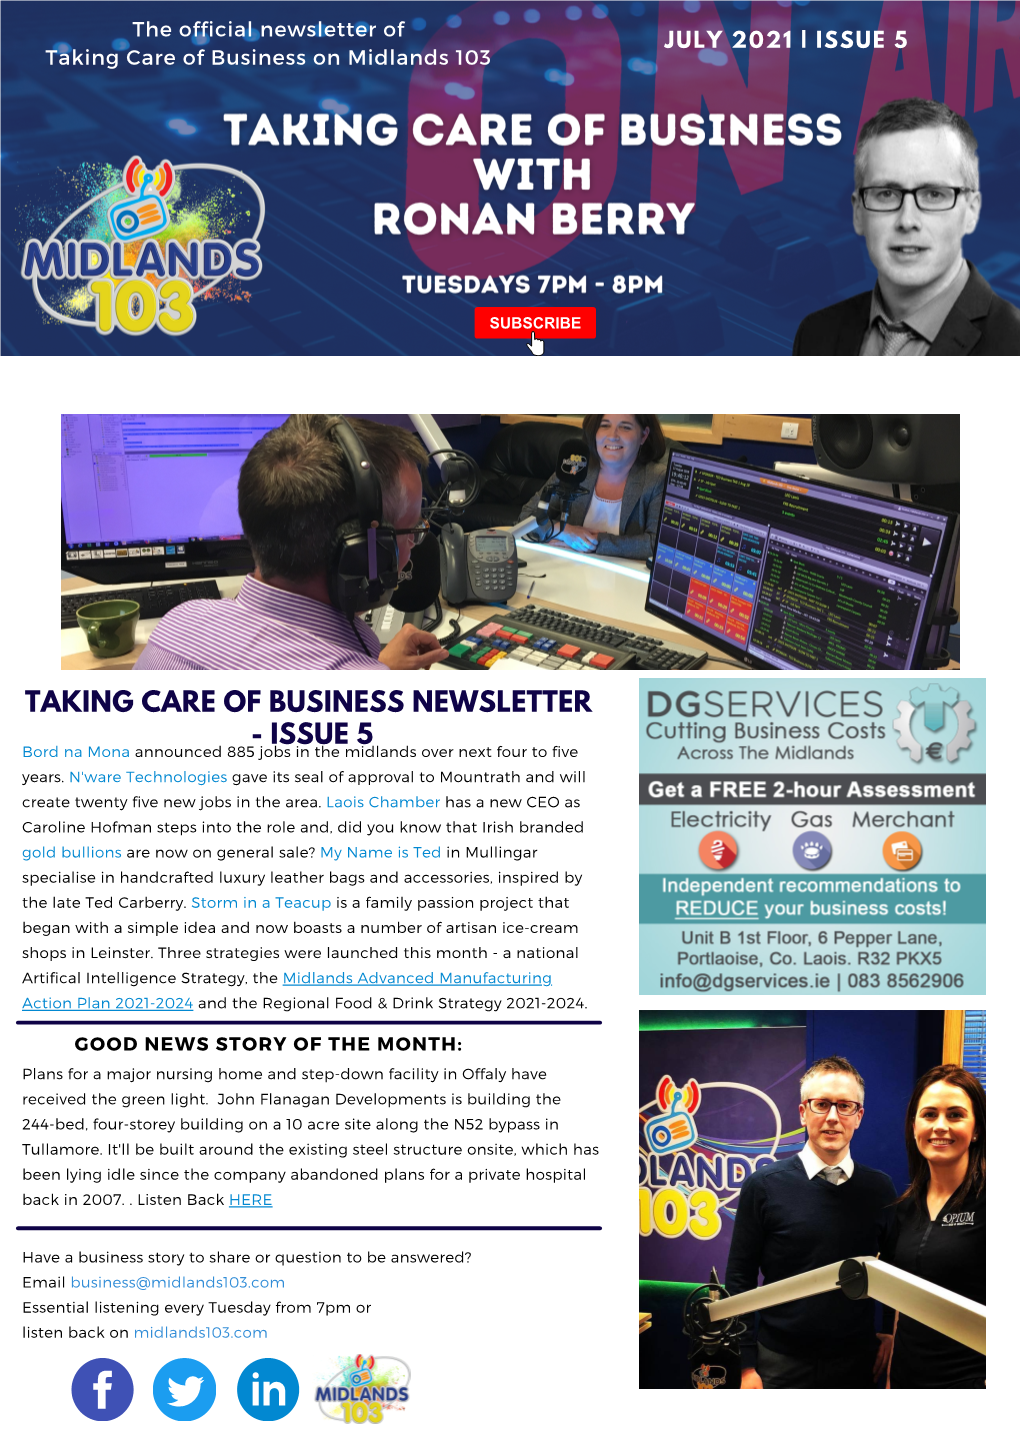 Taking Care of Business Newsletter